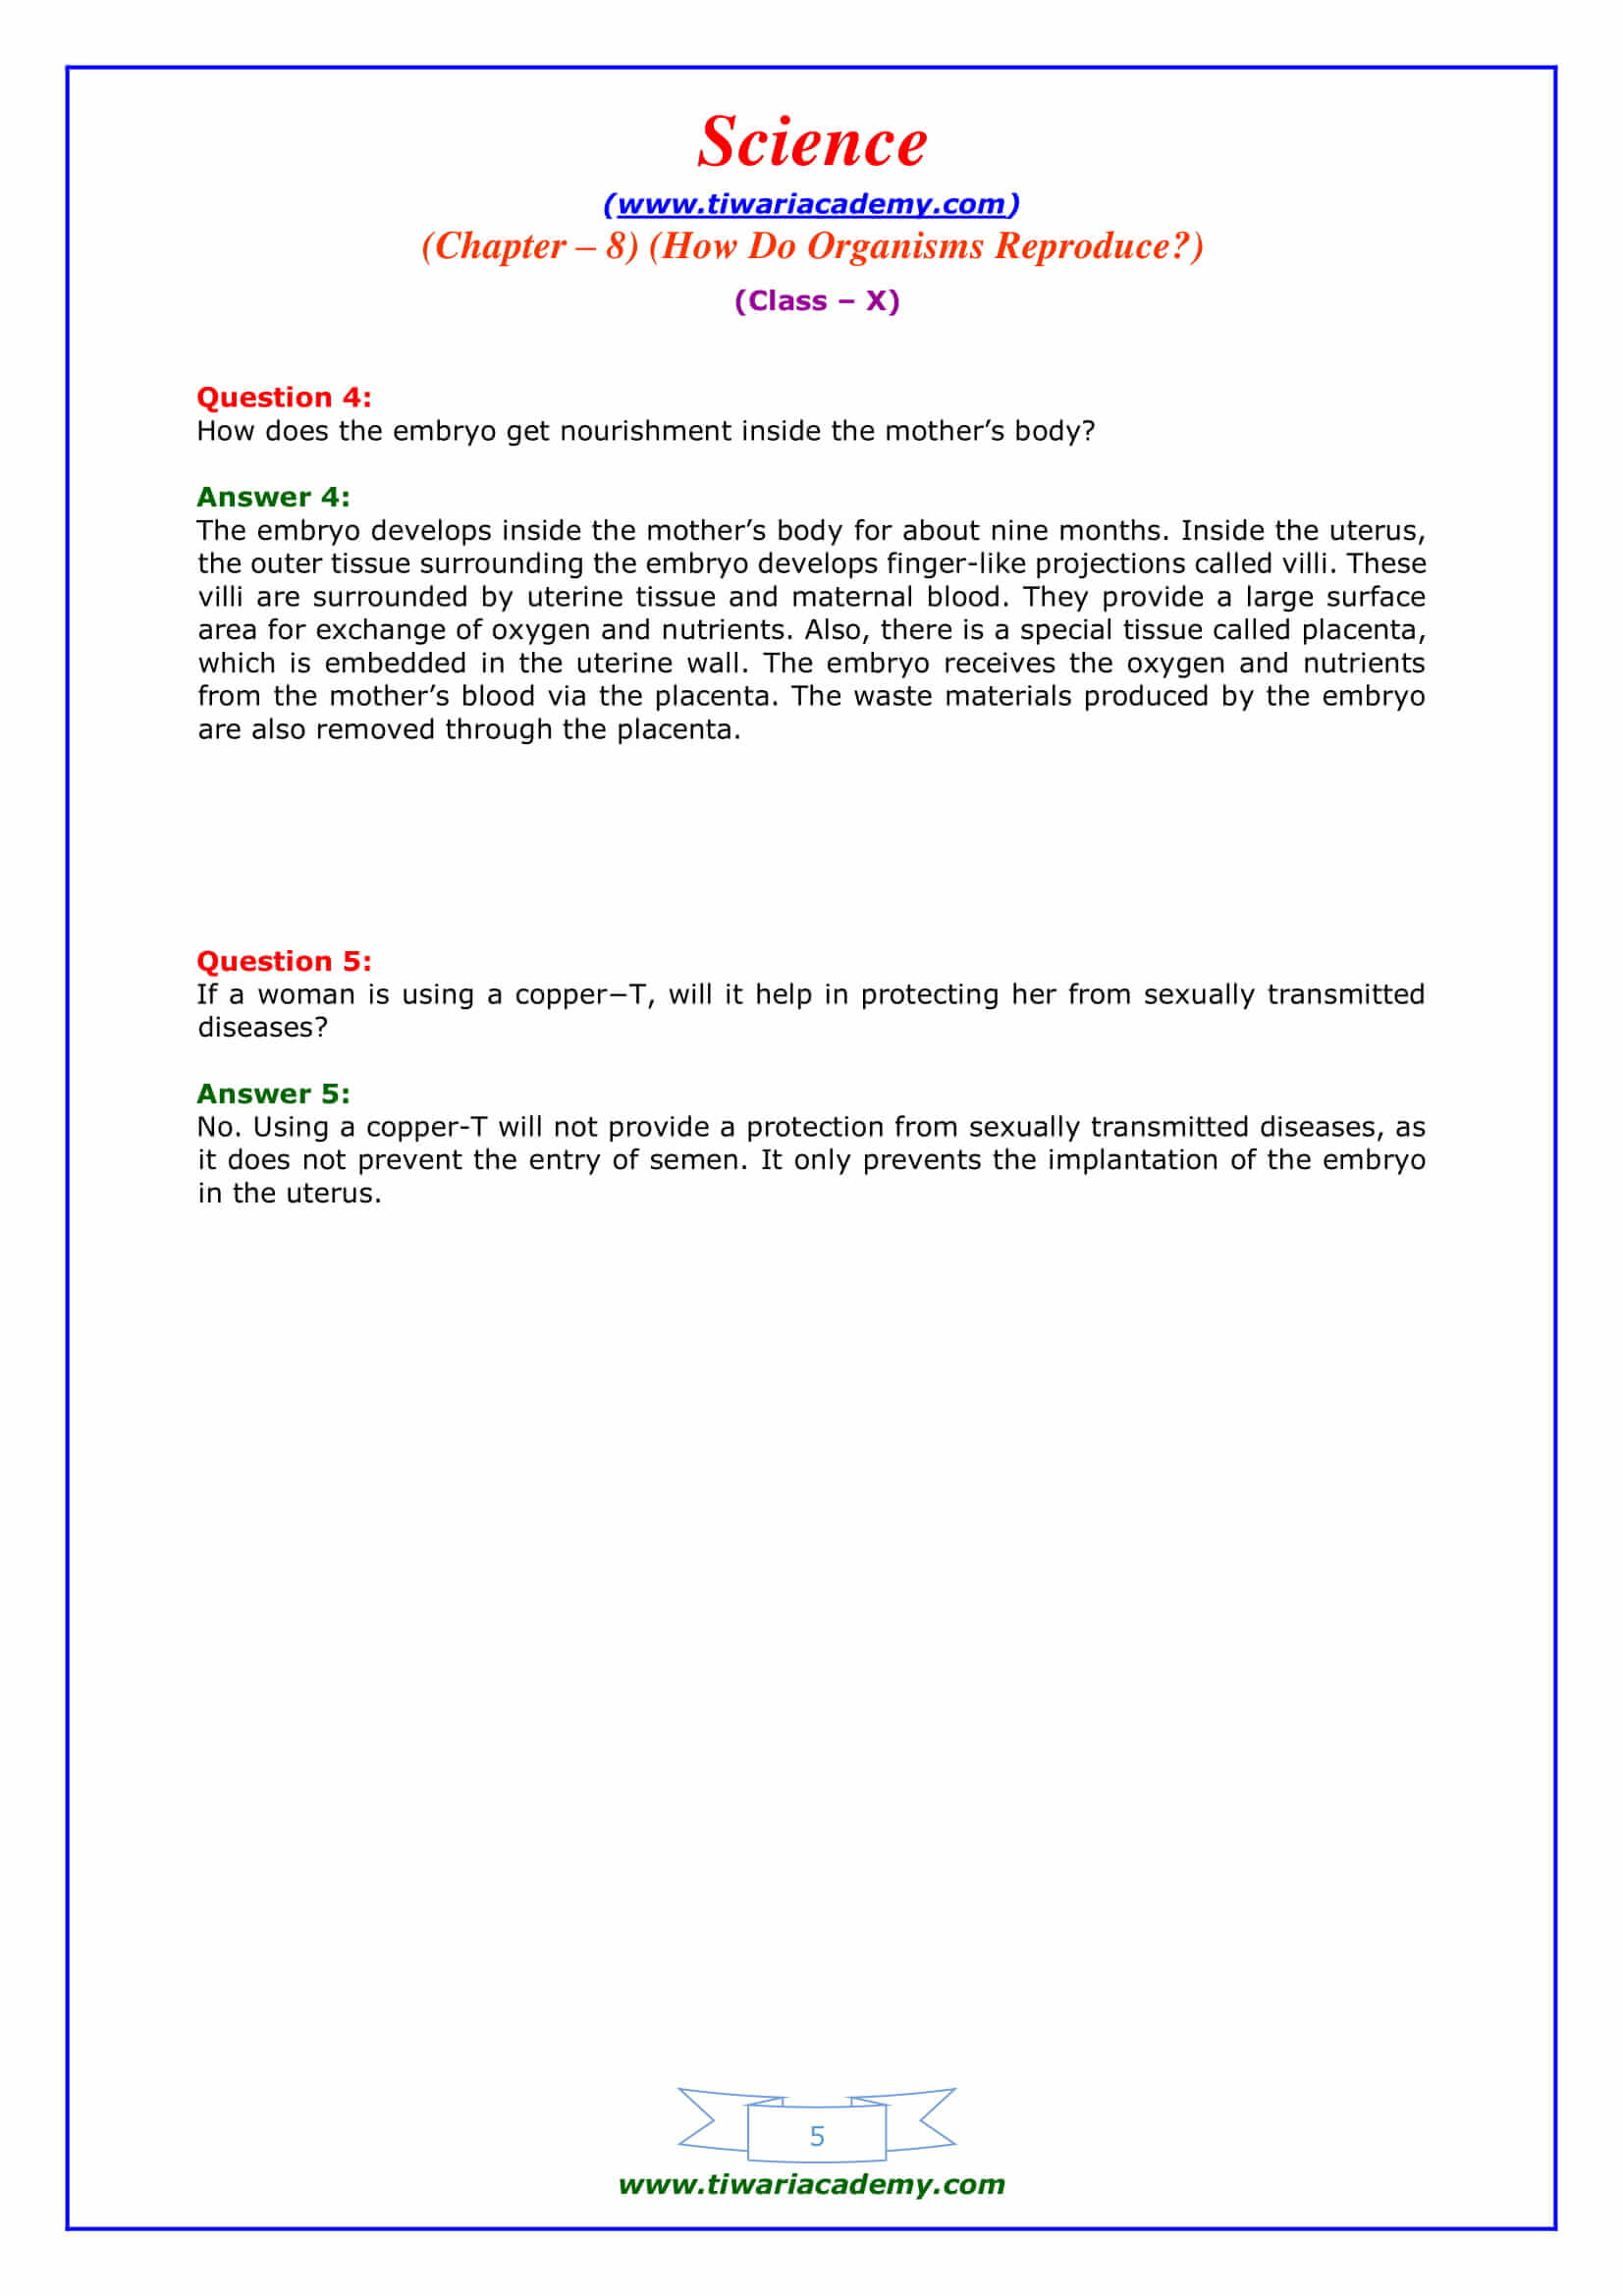 Class 10 Science Chapter 8 page 140 solutions in english medium guide free